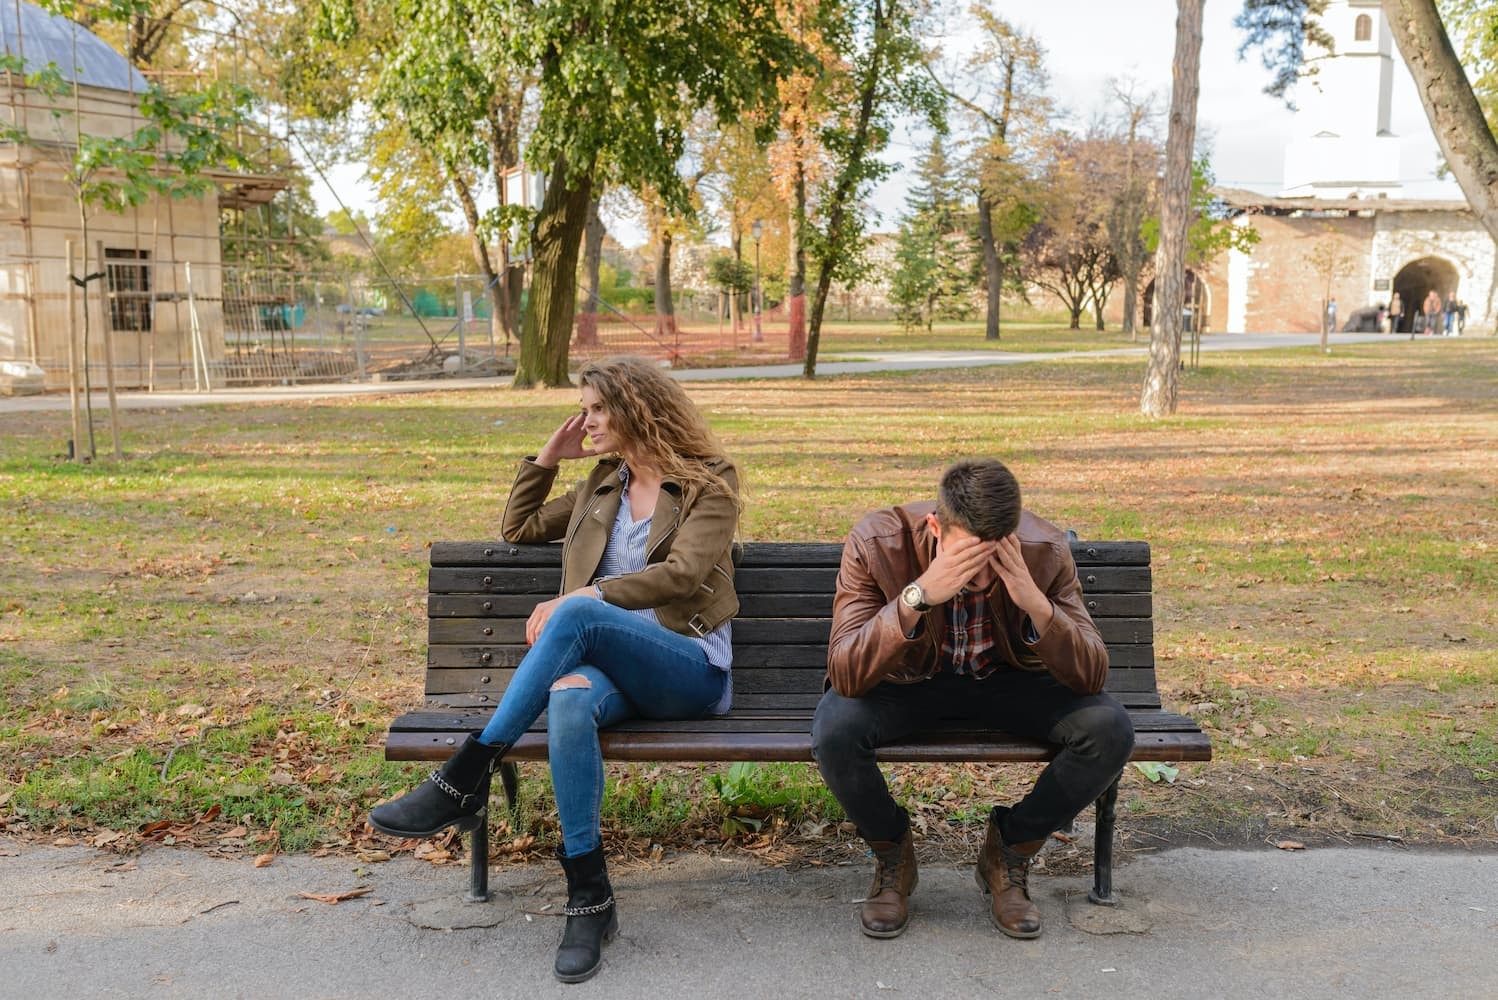 How To Recognise If You Are You Sabotaging Your Relationships